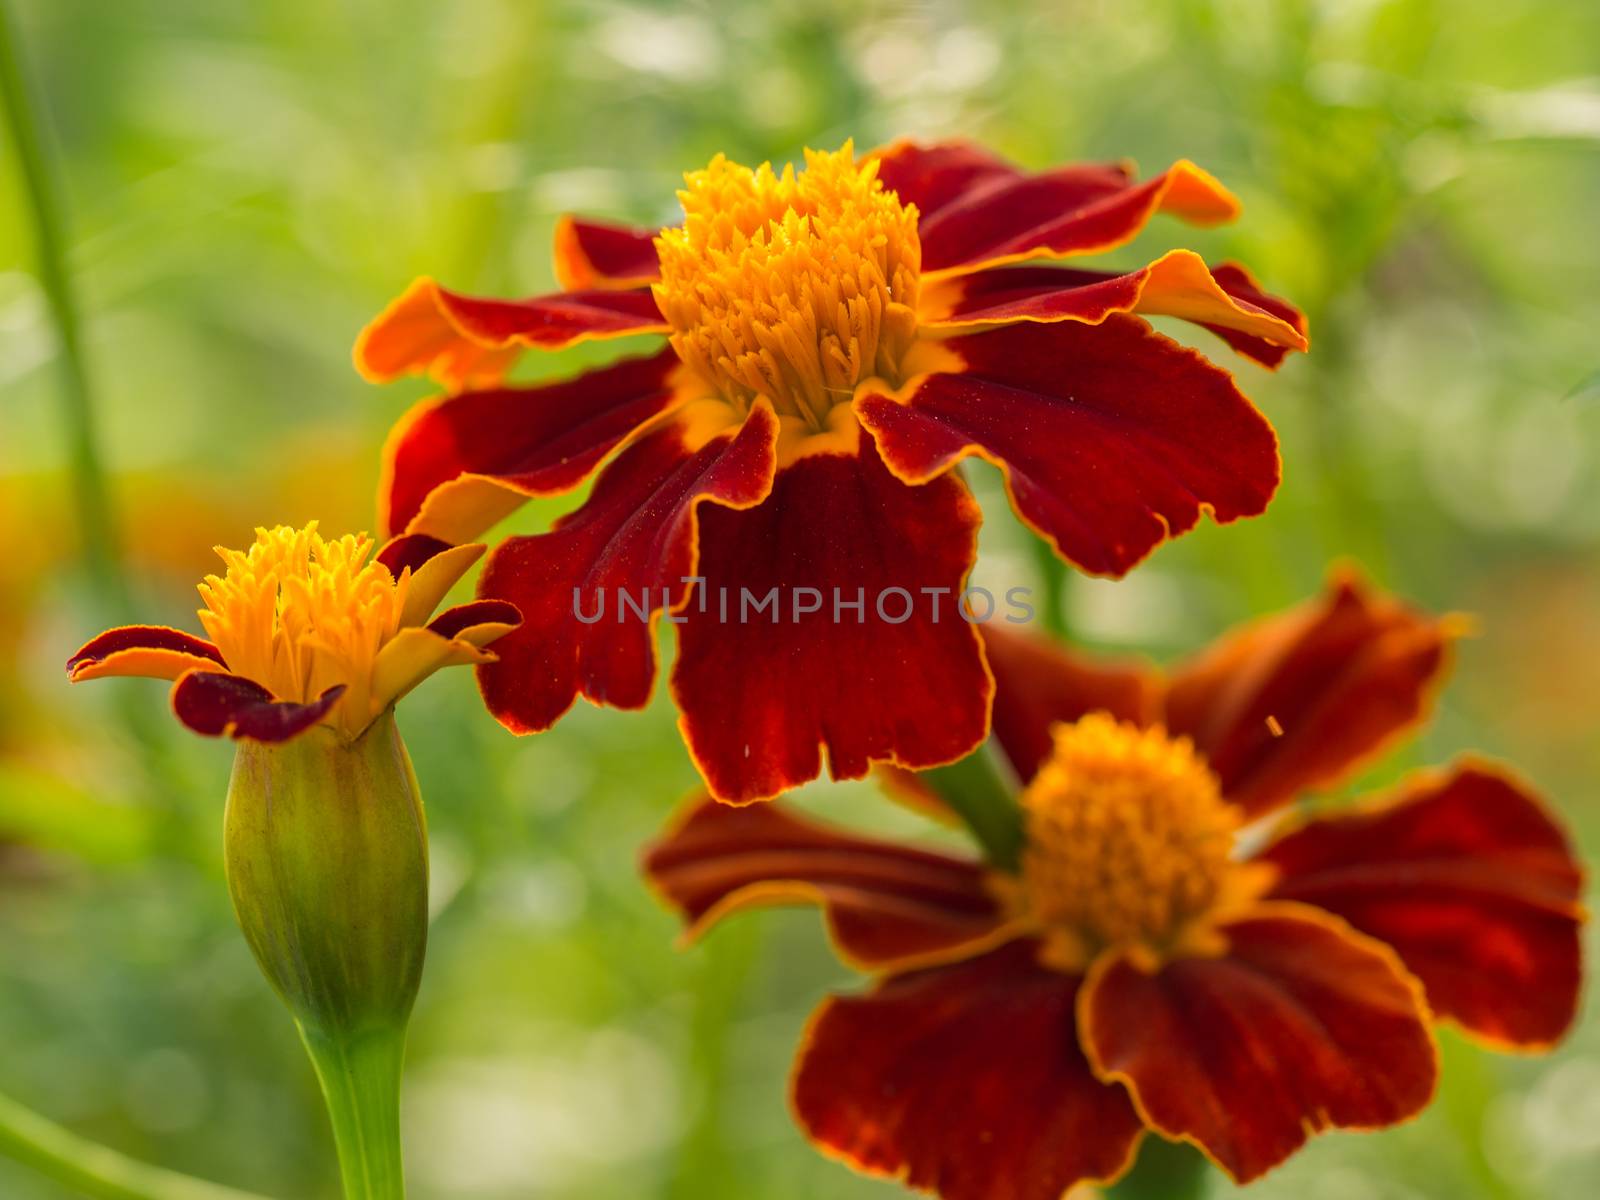 Trio of red and yellow flower by frankhoekzema